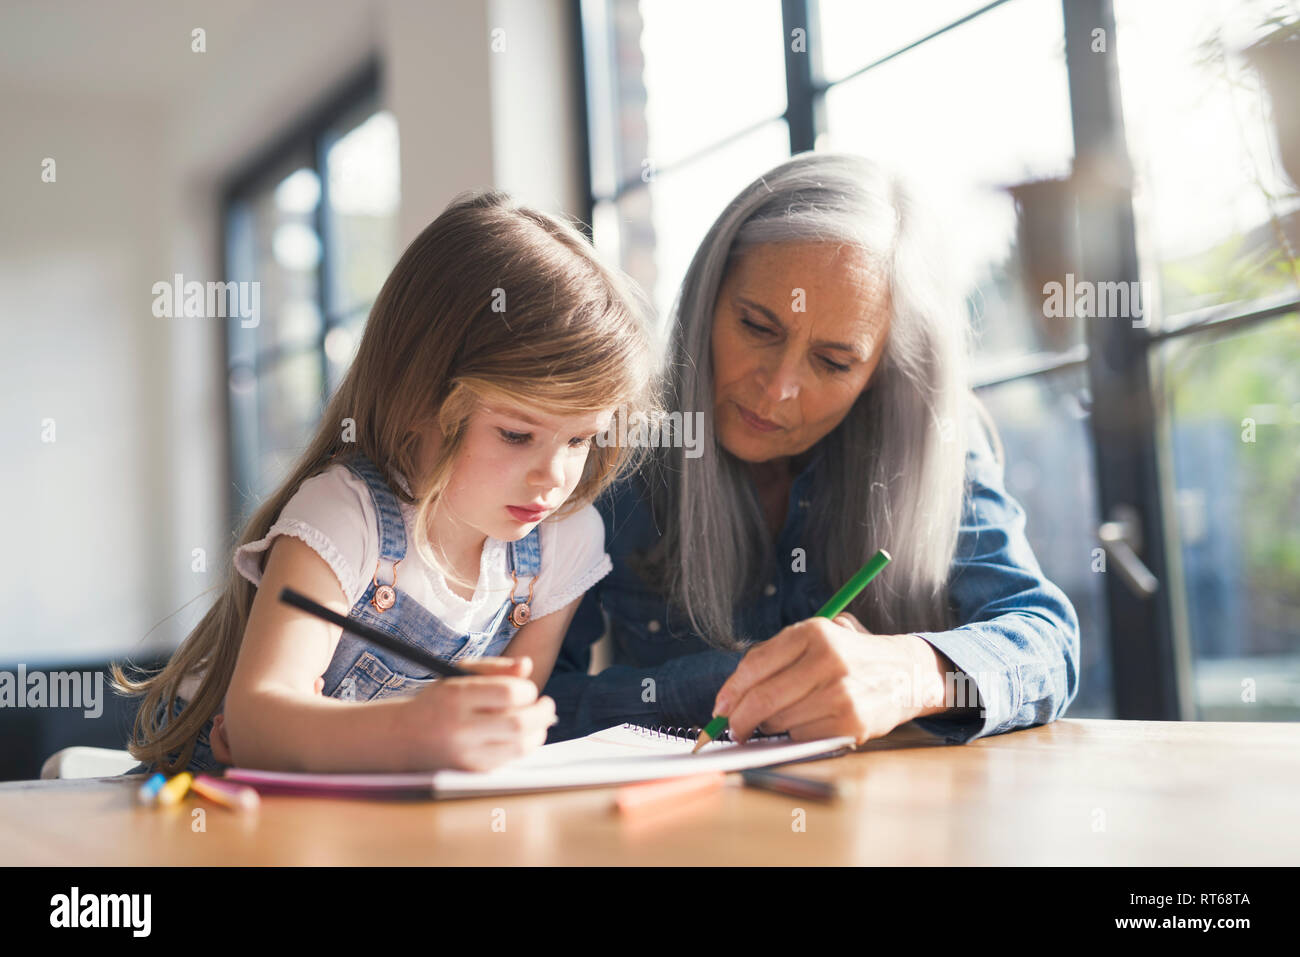 Grandmother and granddaughter making a drawing together Stock Photo